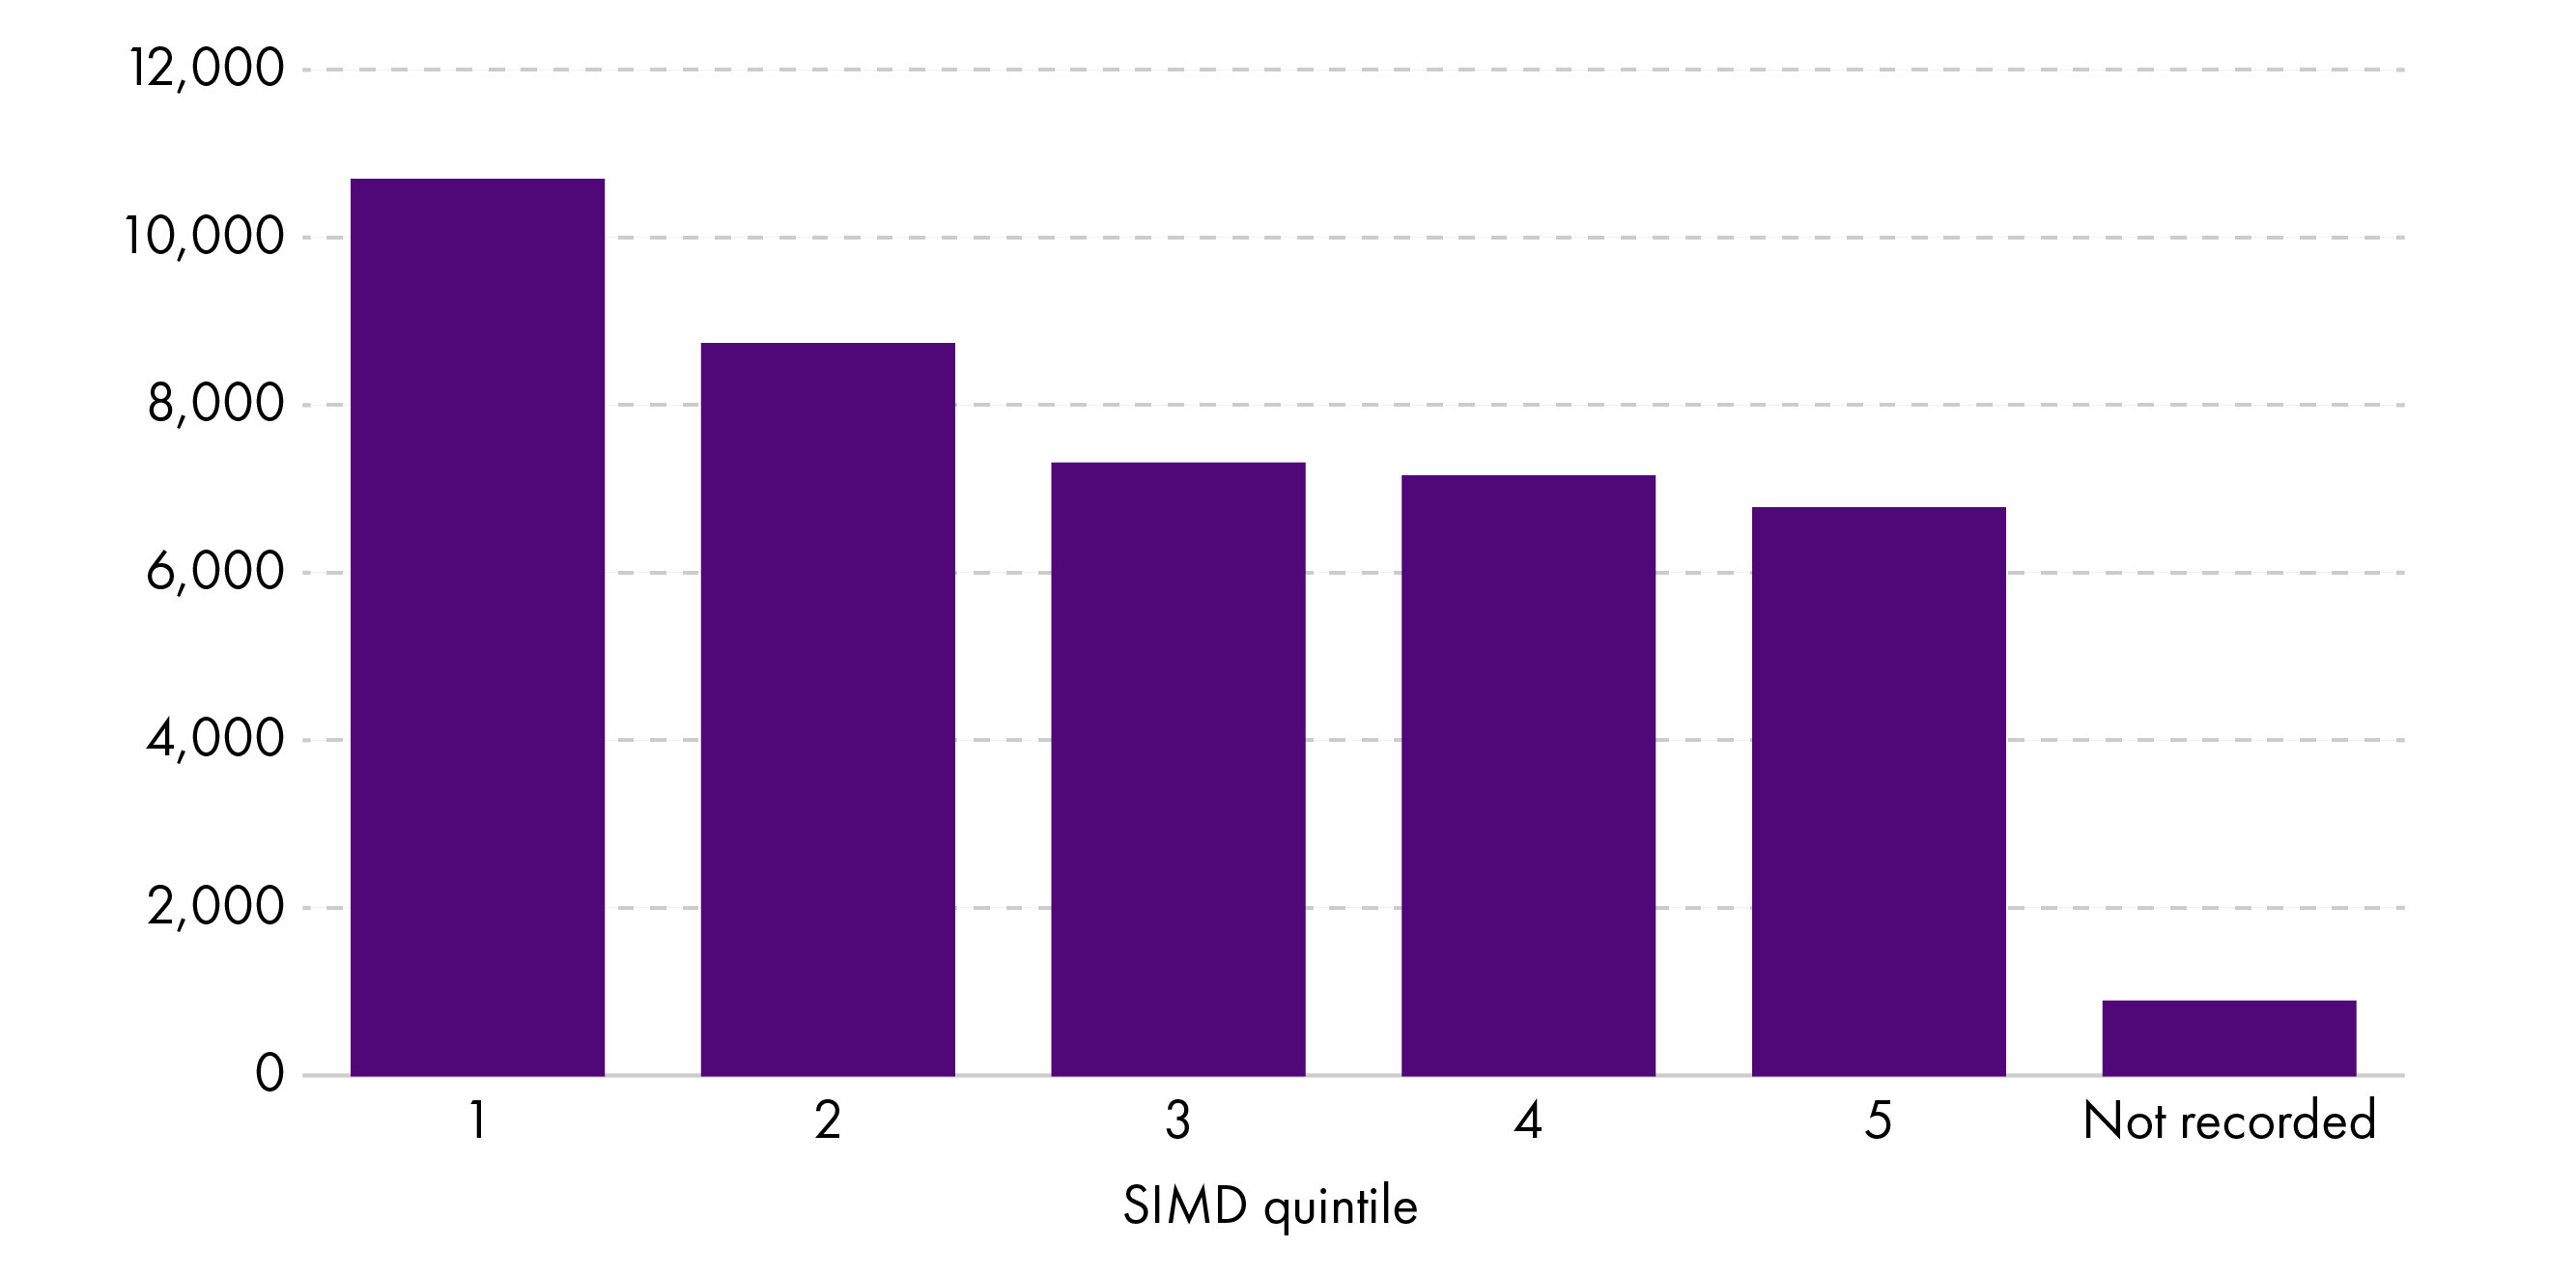 Bar-chart showing the number of referrals to CAMHS by SIMD quintiles 1, 2, 3, 4 and 5. Figures provided in the text description.